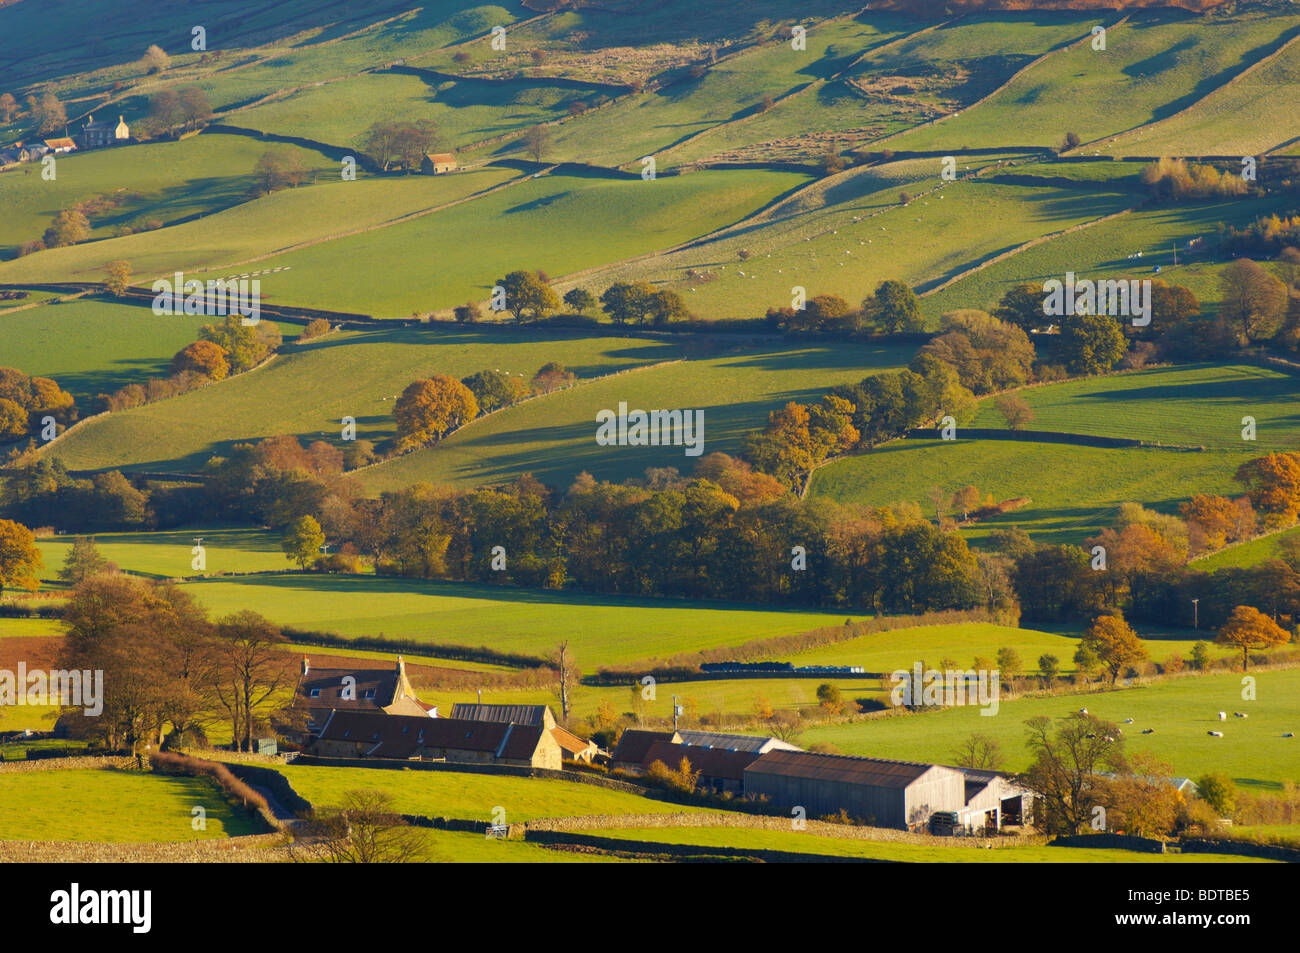 Danby Dale Farm, North Yorkshire Moors National Park, Angleterre. Banque D'Images